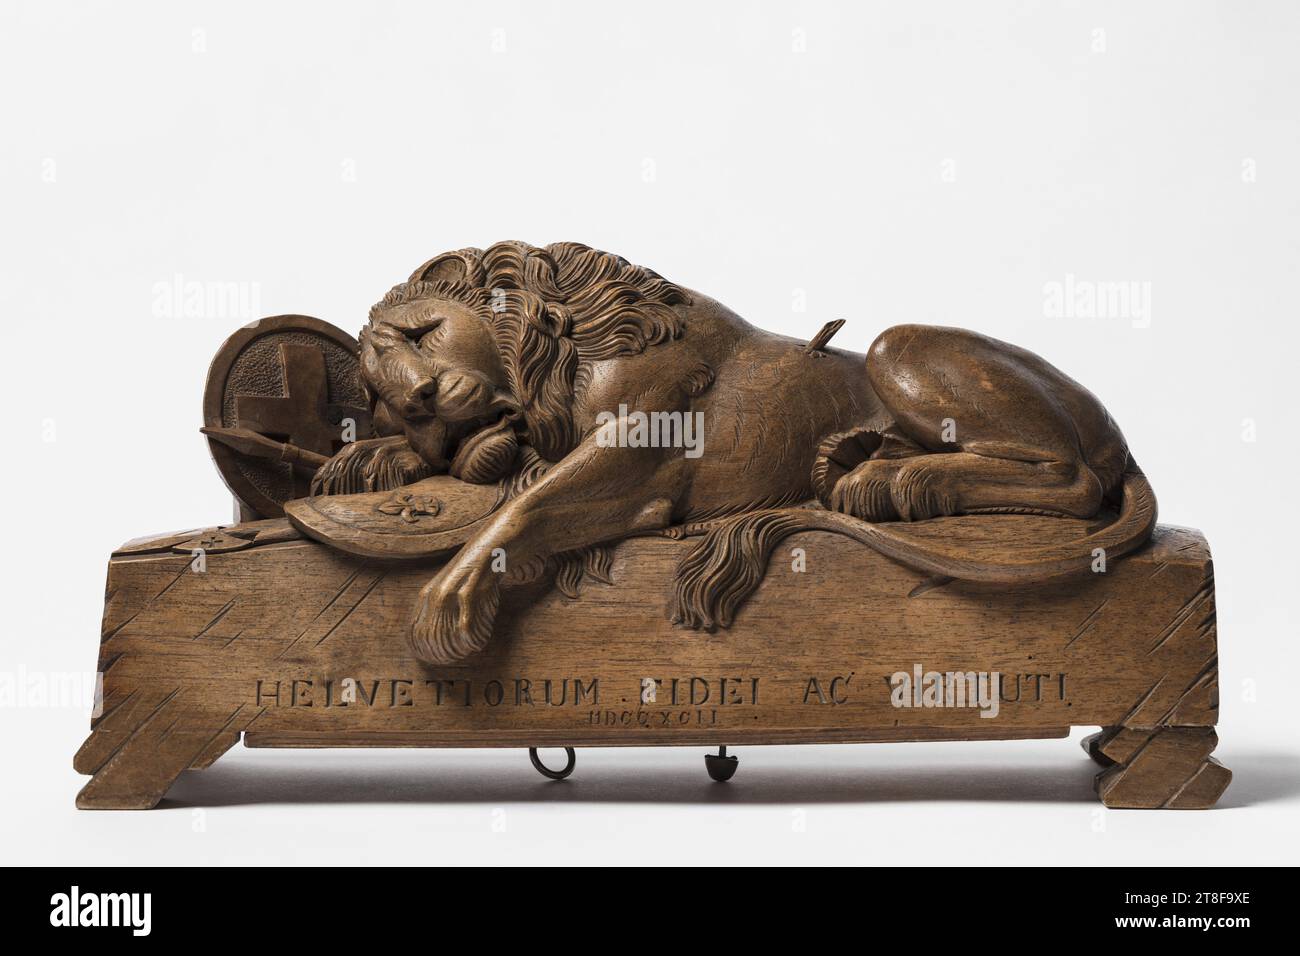 Dying Lion (The Lucerne Lion) with a Music Box, 1892, Musical Instrument, Music box, Sculpture, The dying lion, lying pierced by a spear, with its head and paw resting on the French coat of arms, is a smaller replica in Swiss walnut wood after Bertel Thorvaldsen's famous sandstone monument in Lucerne, 'Dying Lion (Swiss Lion)'. Swiss Lion Courage. Thorvaldsen's Swiss Lion was created in 1821, as a tribute to the Swiss Guardsmen who died during the Storming of the Tuileries on August 10, 1792, while defending the French King Louis XVI., Wood, Walnut, Metal, Carved, Height (maximum) 18 cm Stock Photo